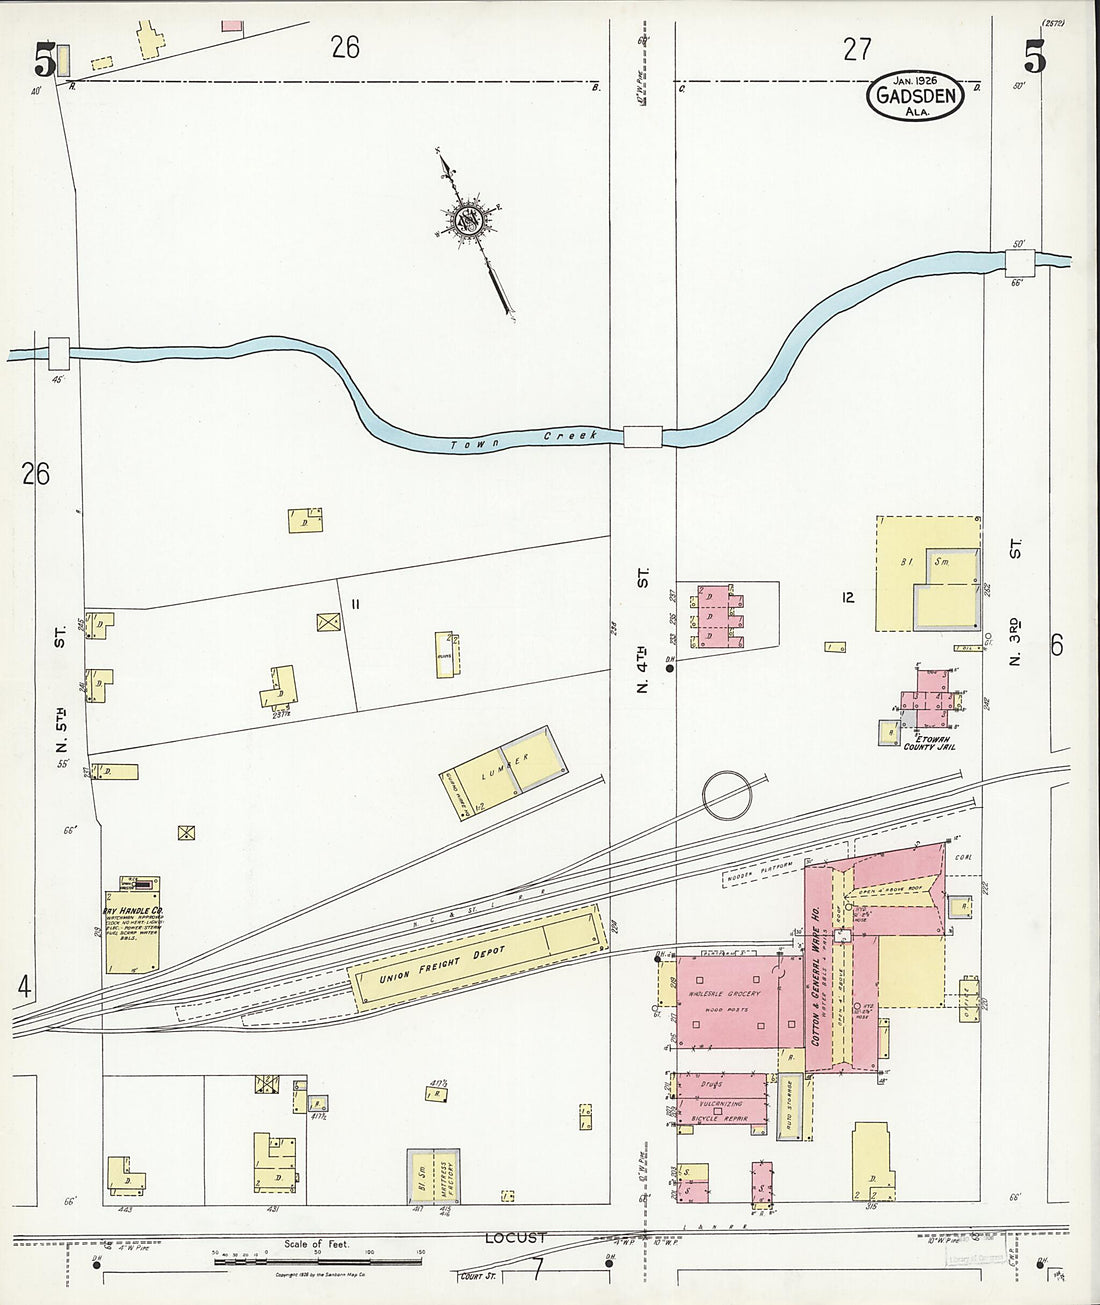 This old map of Gadsden, Etowah County, Alabama was created by Sanborn Map Company in 1926